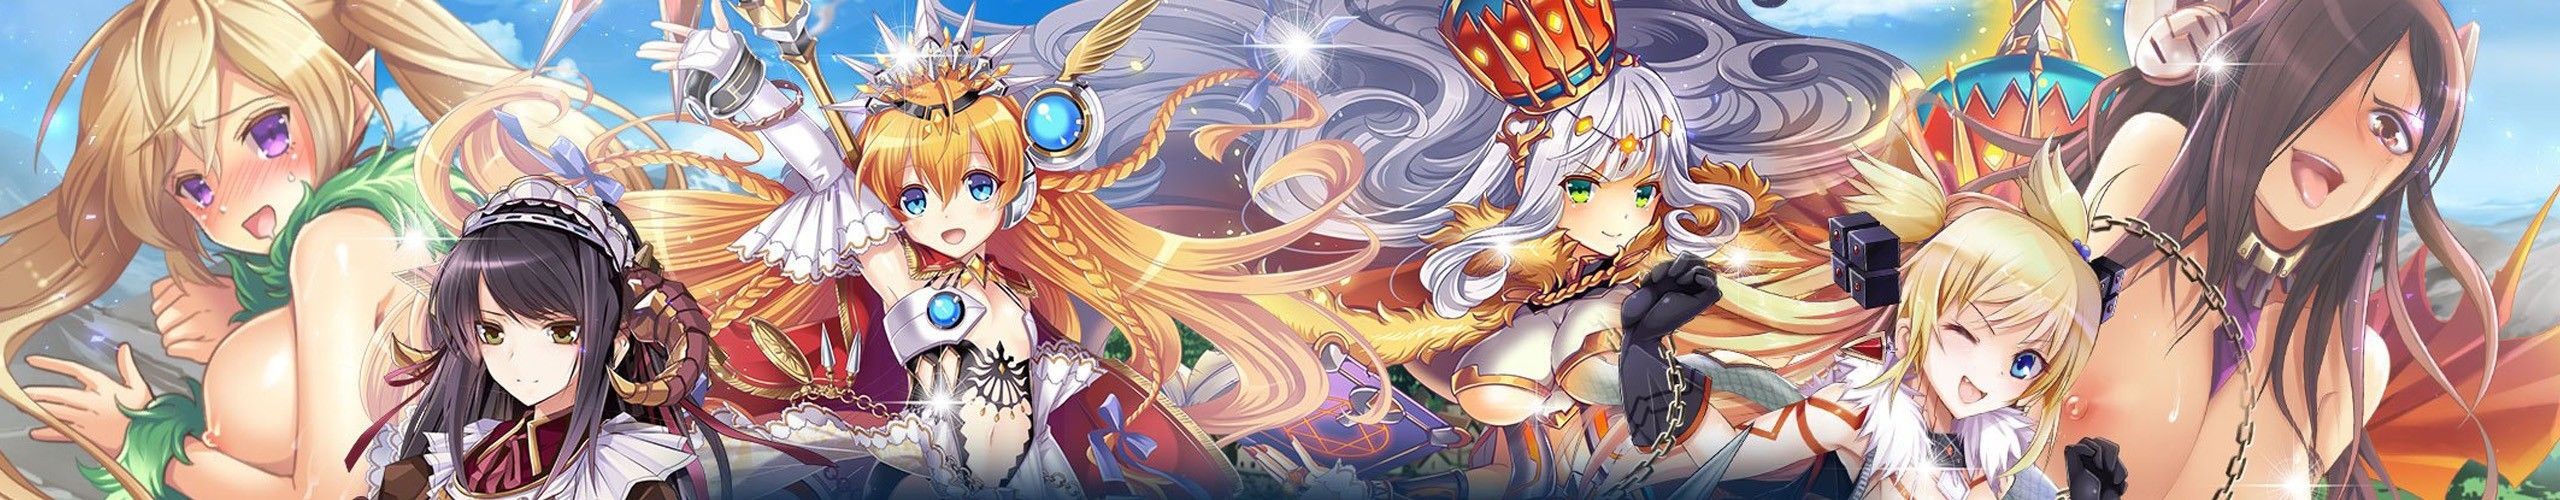 Play Kamihime Project R Finish Quests And Get Rewards😻